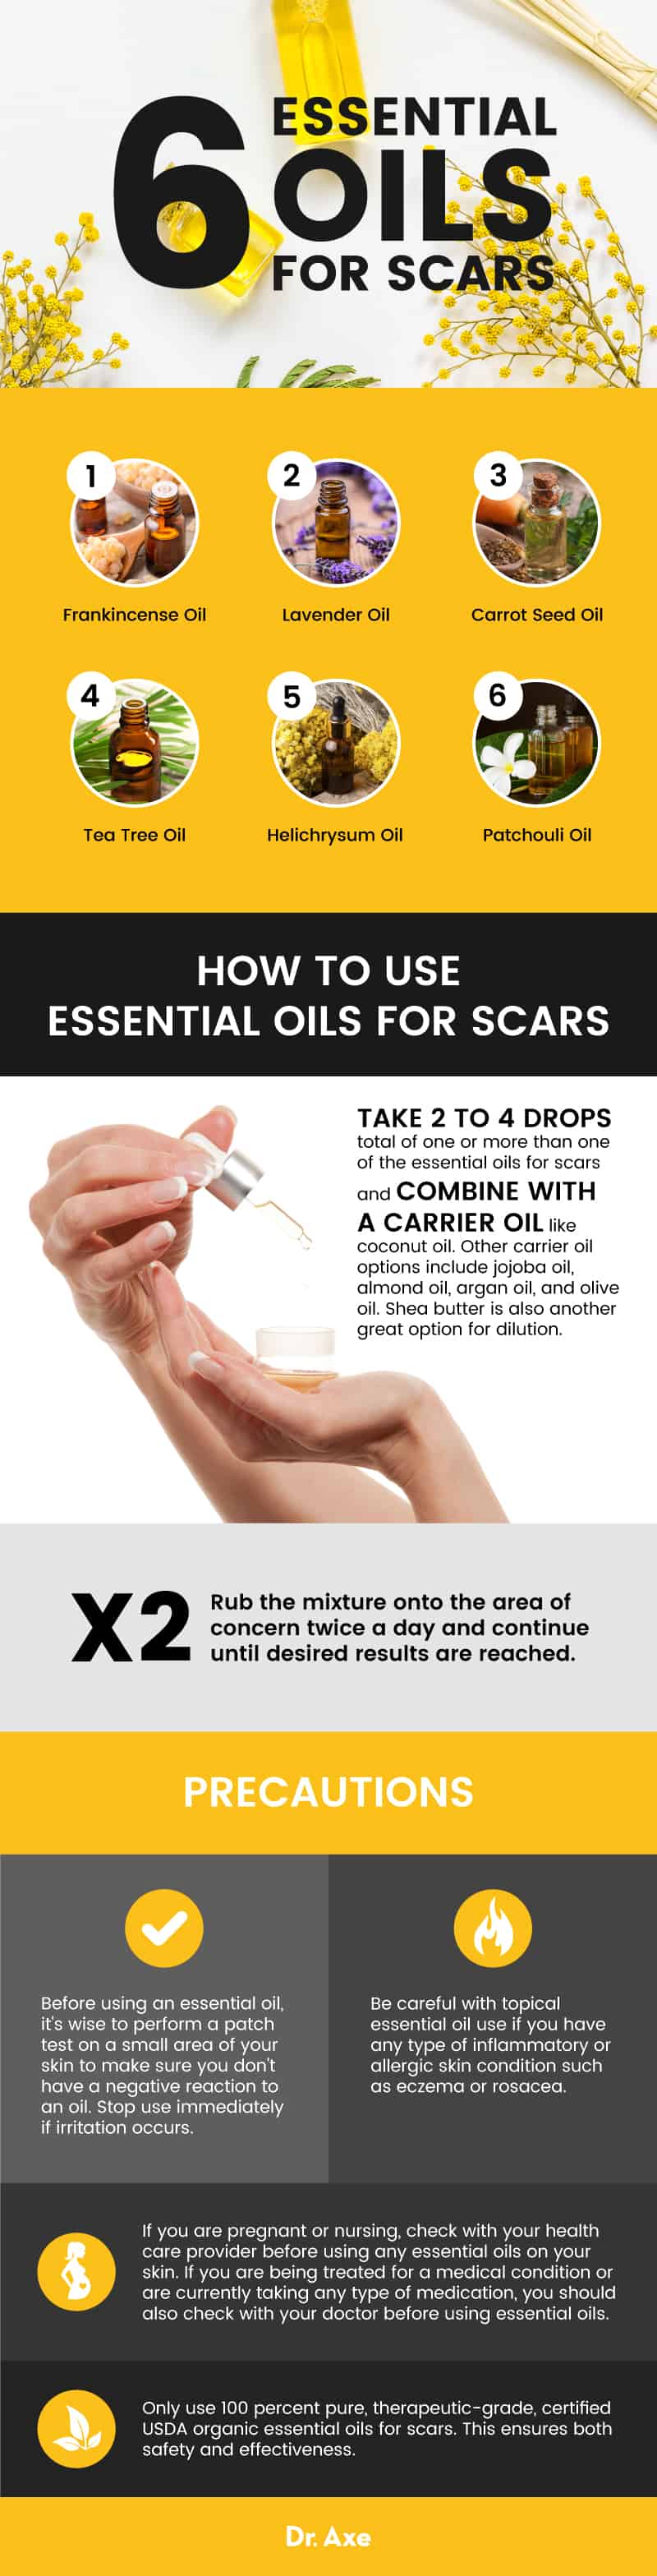 6 essential oils for scars - Dr. Axe